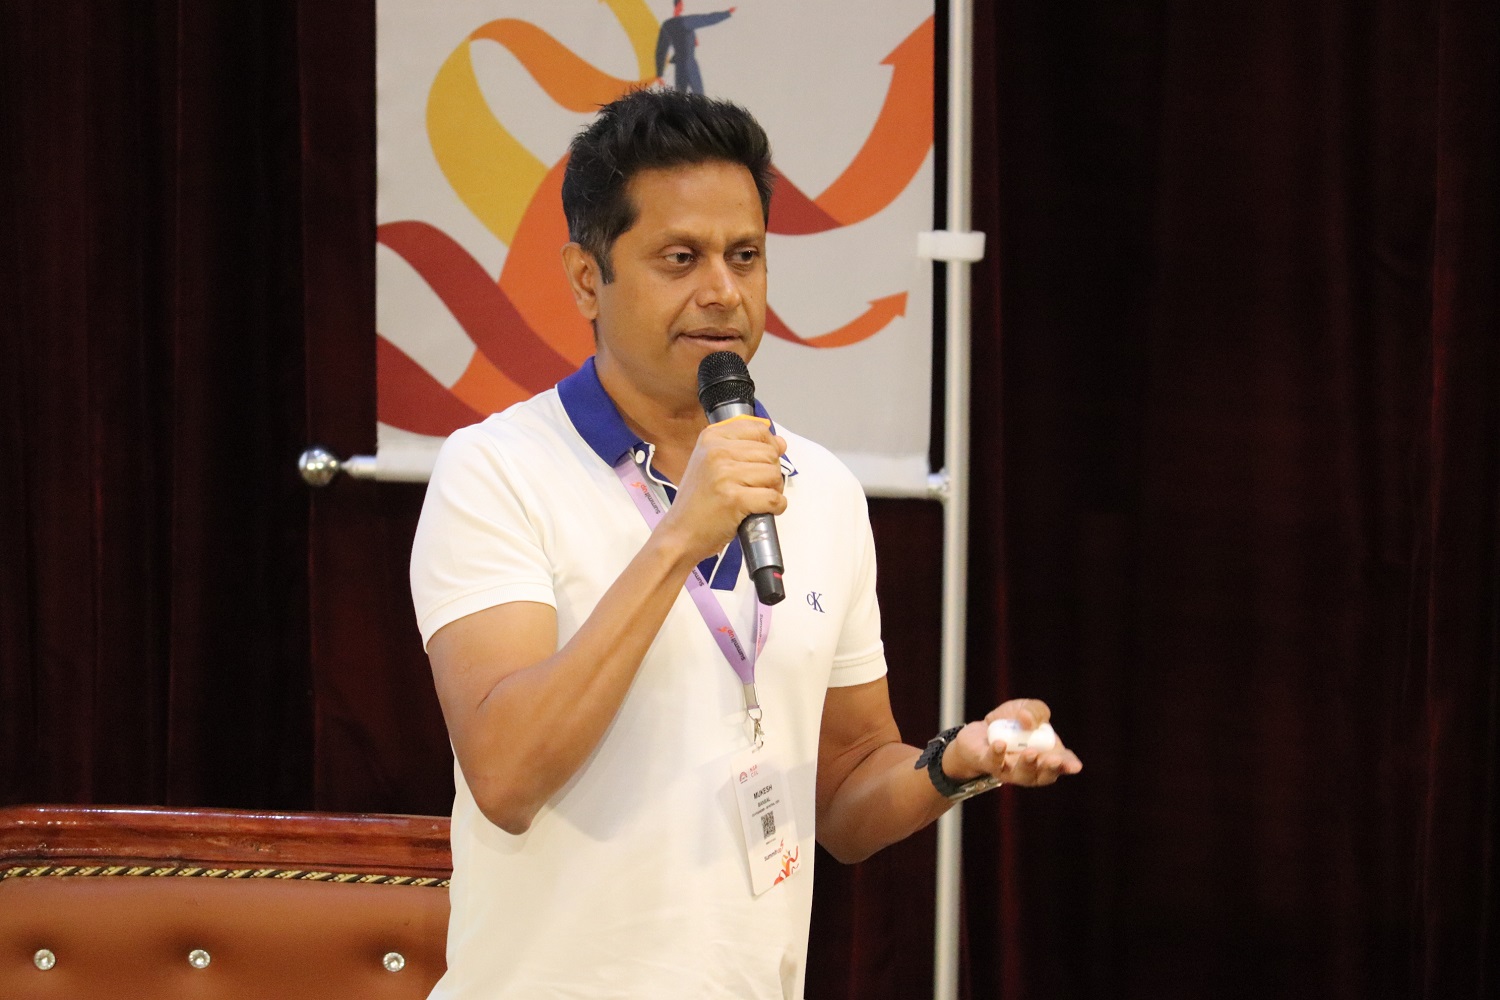 Mukesh Bansal, Co-founder, Myntra and CEO, Cult.fit, delivers the keynote address on Caveat Entrepreneur - navigating the next 12 months.